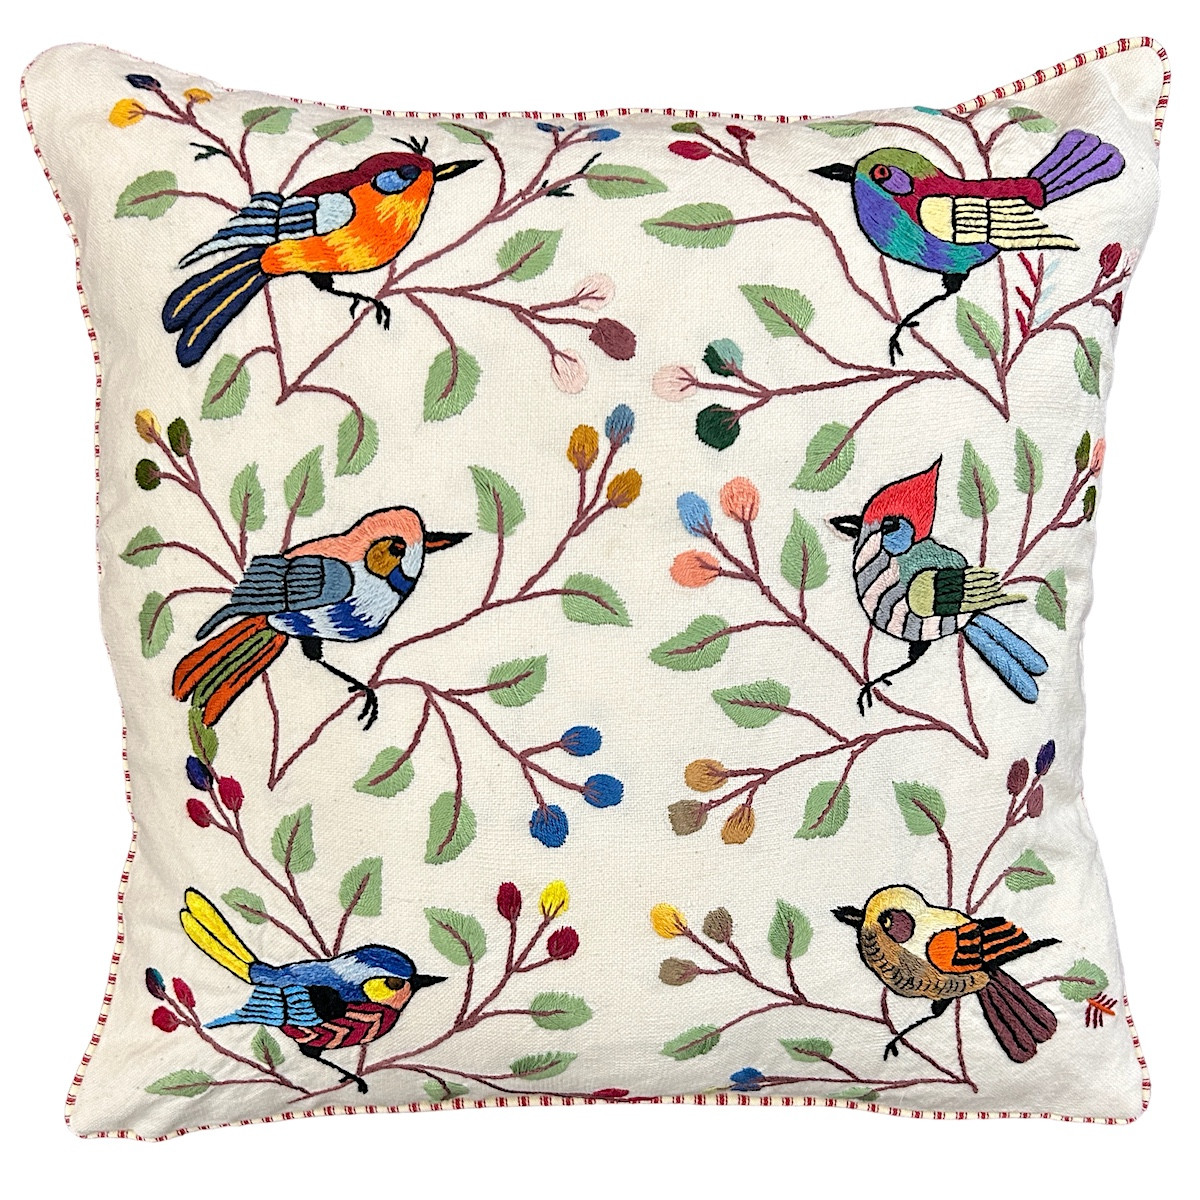 Handwoven cotton pillow with hand embroidery by Rosa, one of the talented embroidery artists of Santiago Atitlan. The detailed embroidery is birds with branches, leaves and flowers on a peach colored handwoven cotton cloth. The back and the piping are red and white striped cotton ticking fabric. Embroidery is multicolored. The whimsical birds have a black outline.